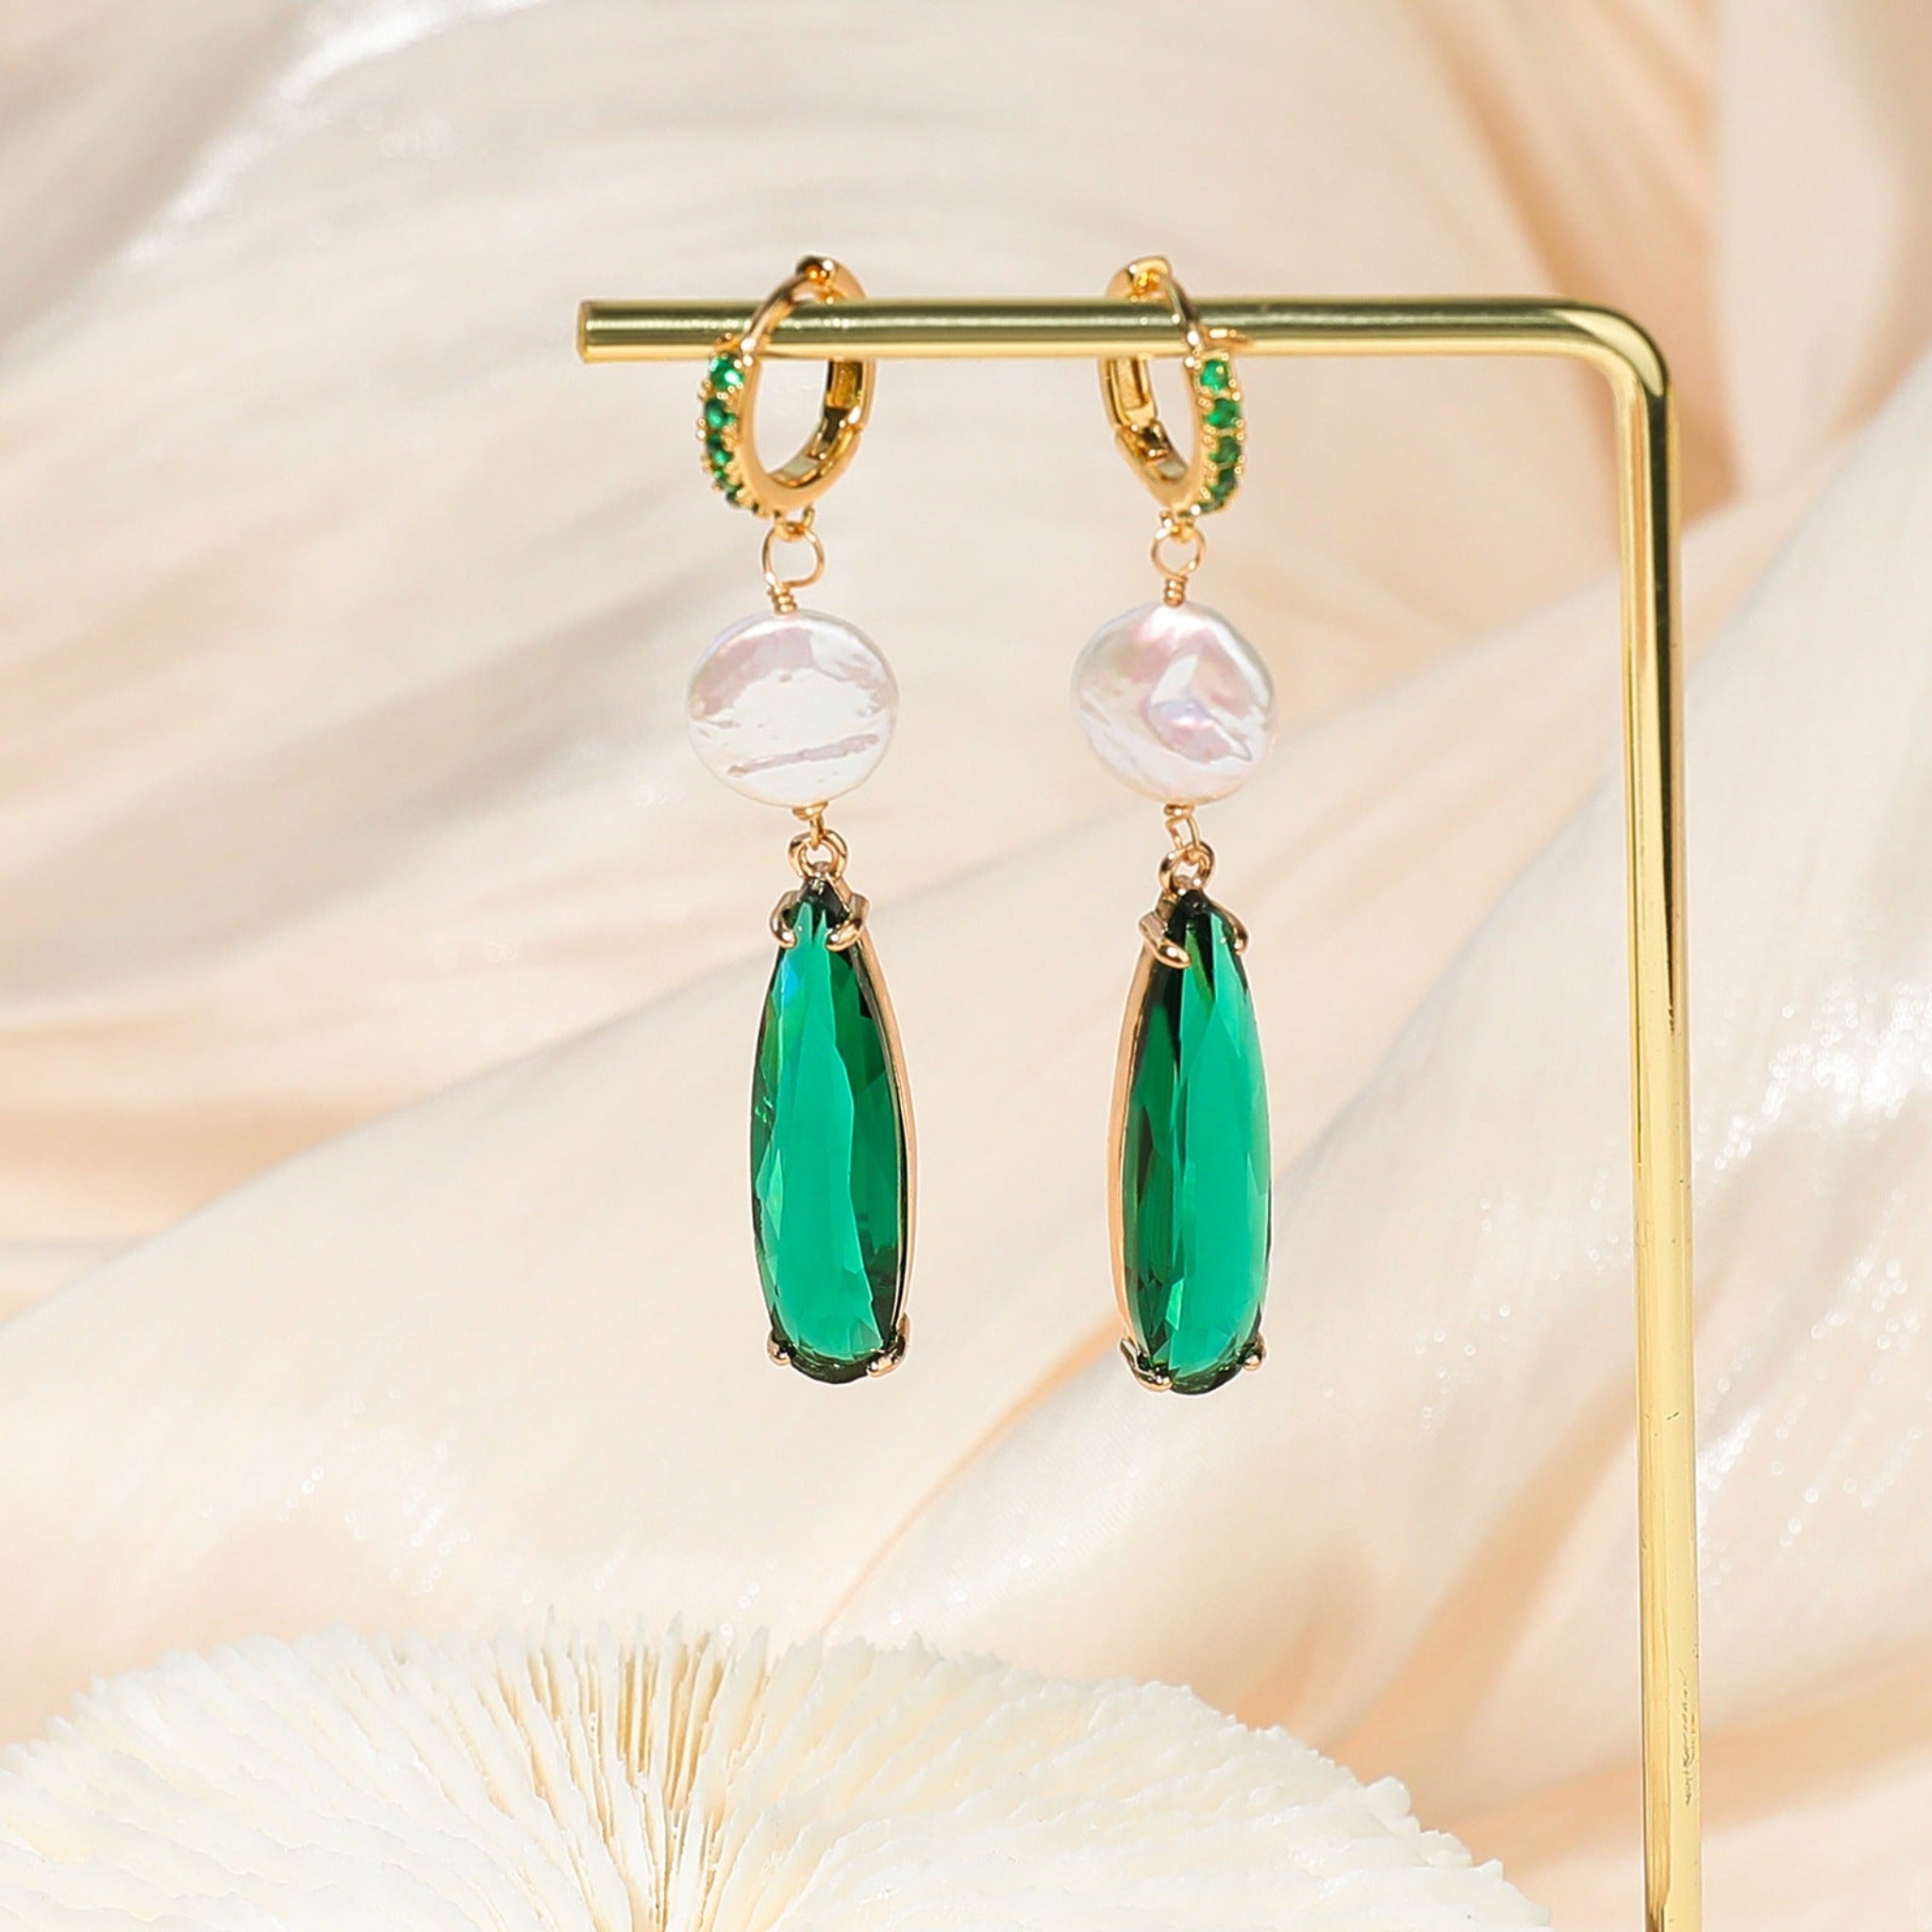 French Vintage Chic Elegant Geometric Green Agate Earrings with Timeless Grace  UponBasics   